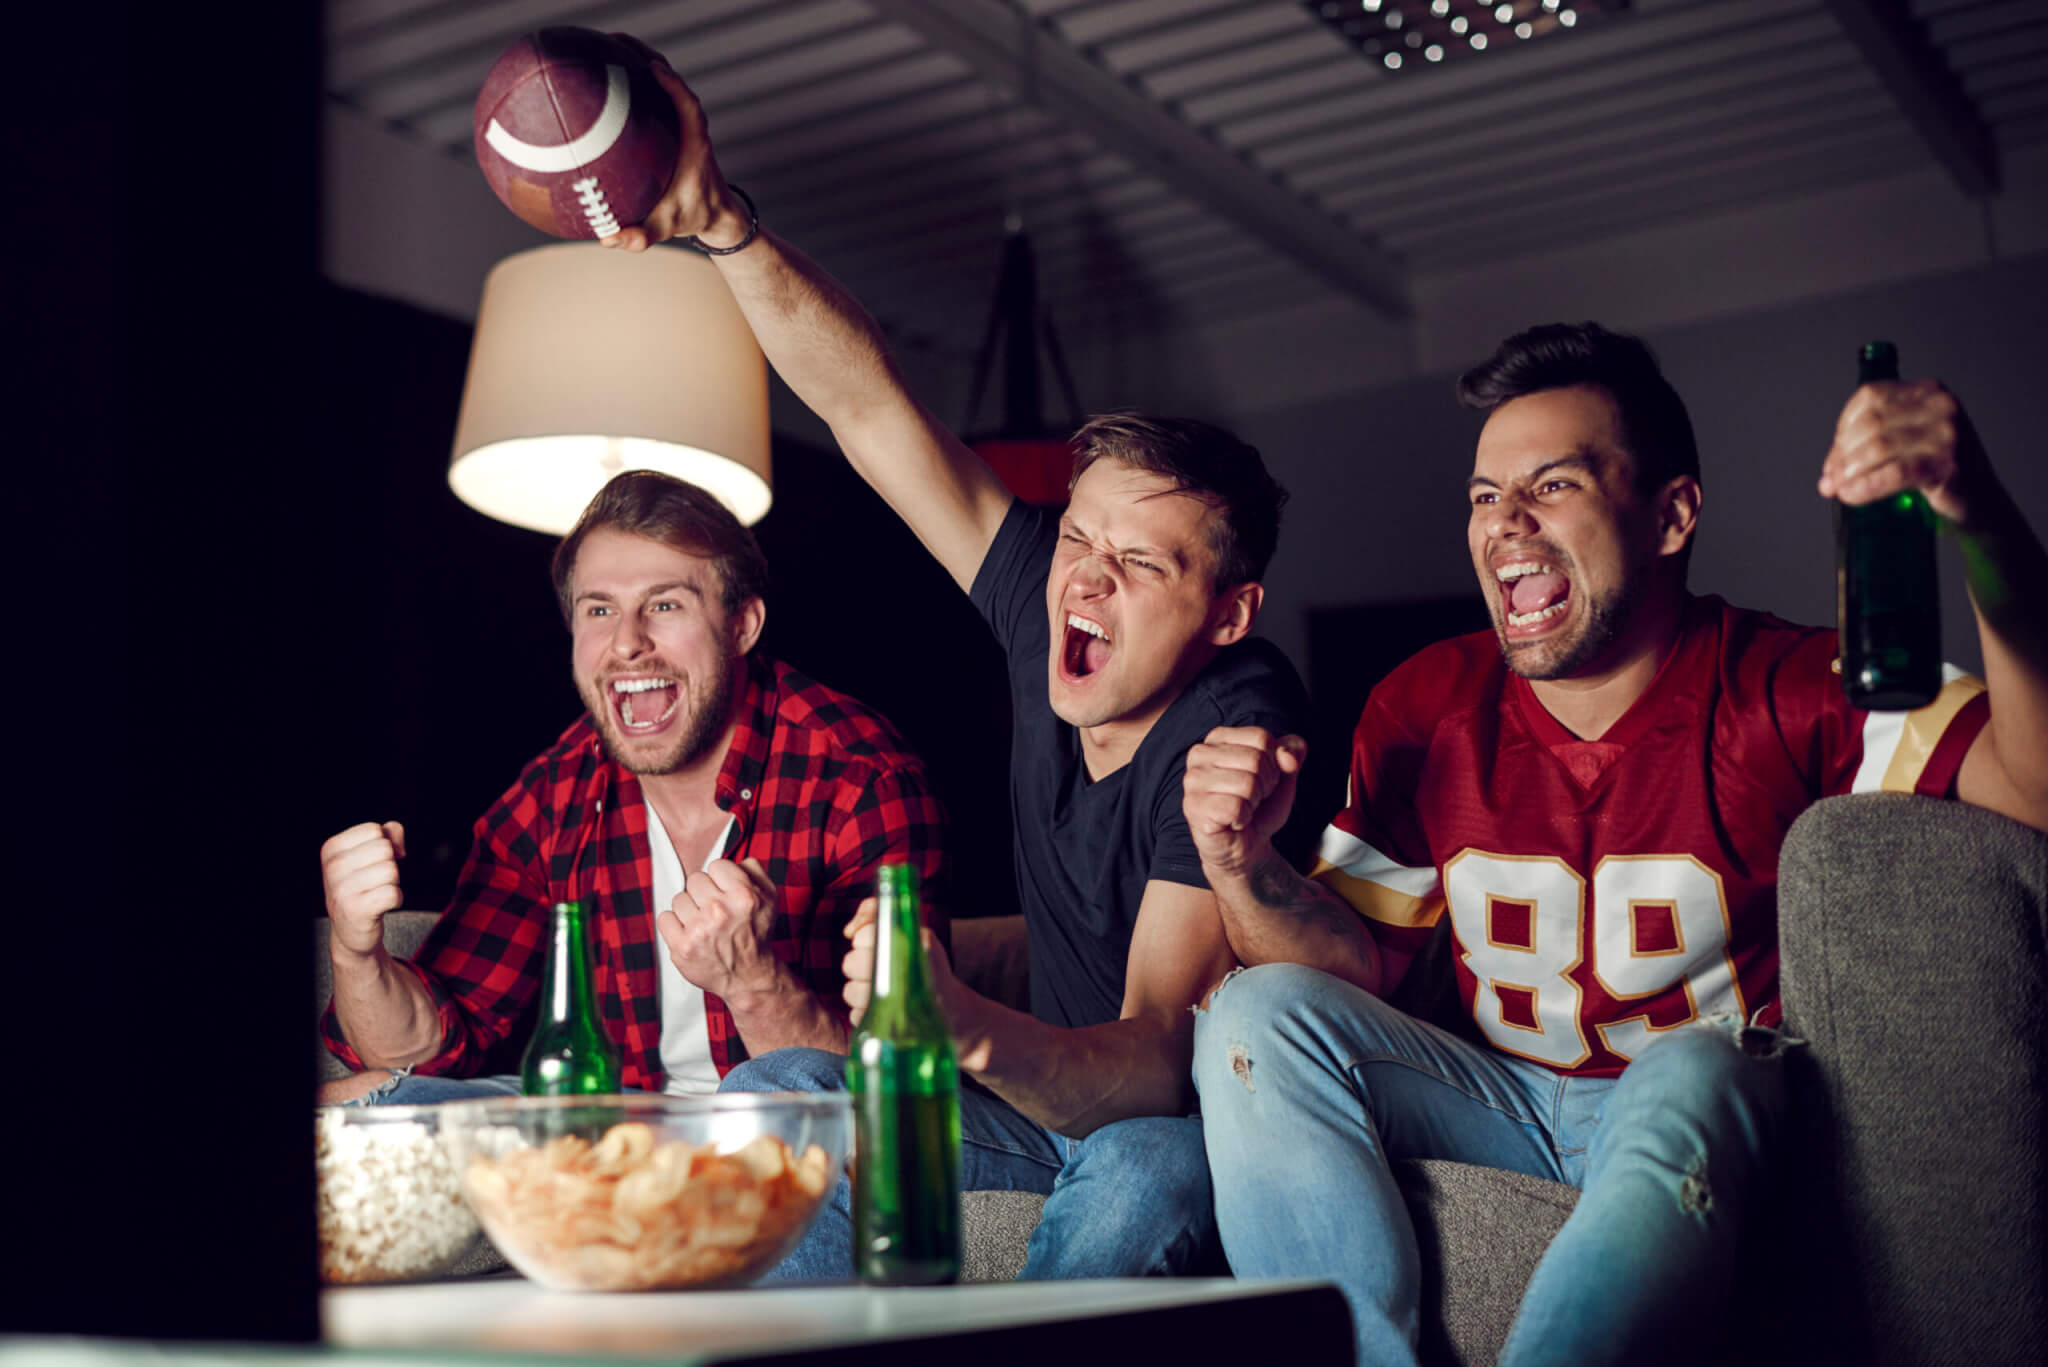 Friends watching the Super Bowl or football game on TV